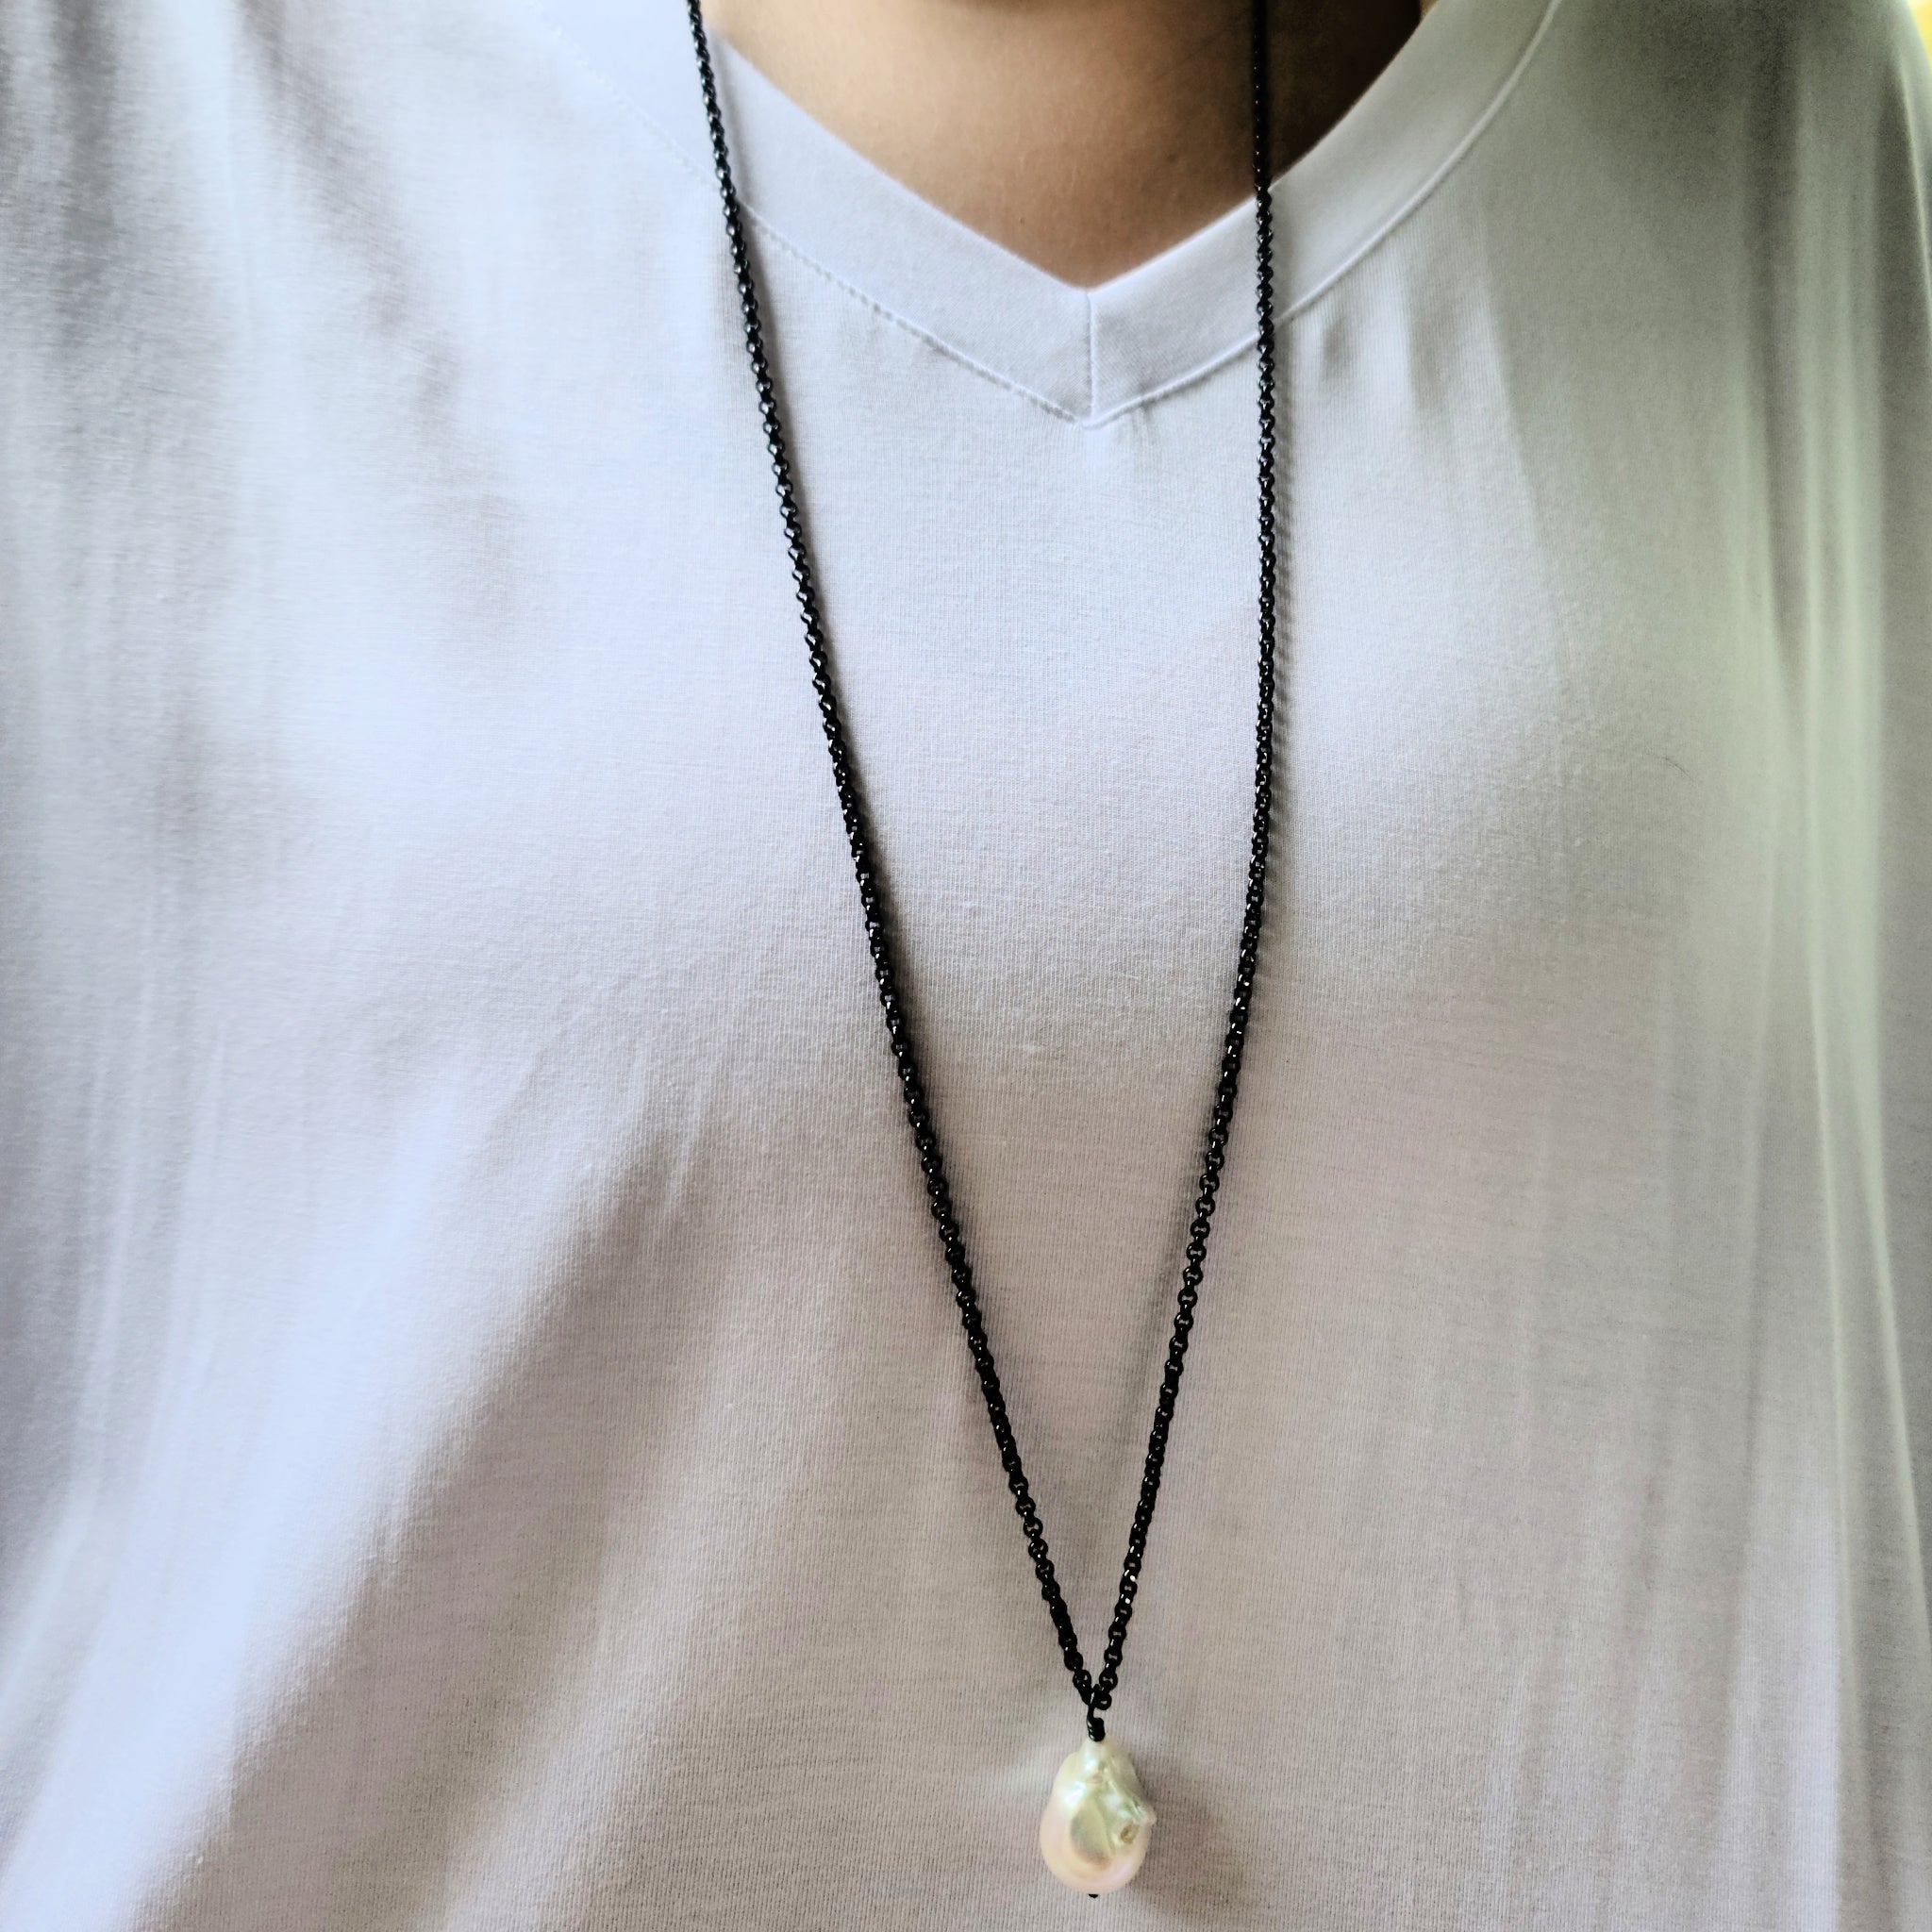 Model wearing Oxidized Sterling with Freshwater Pearl pendant with Base metal chain